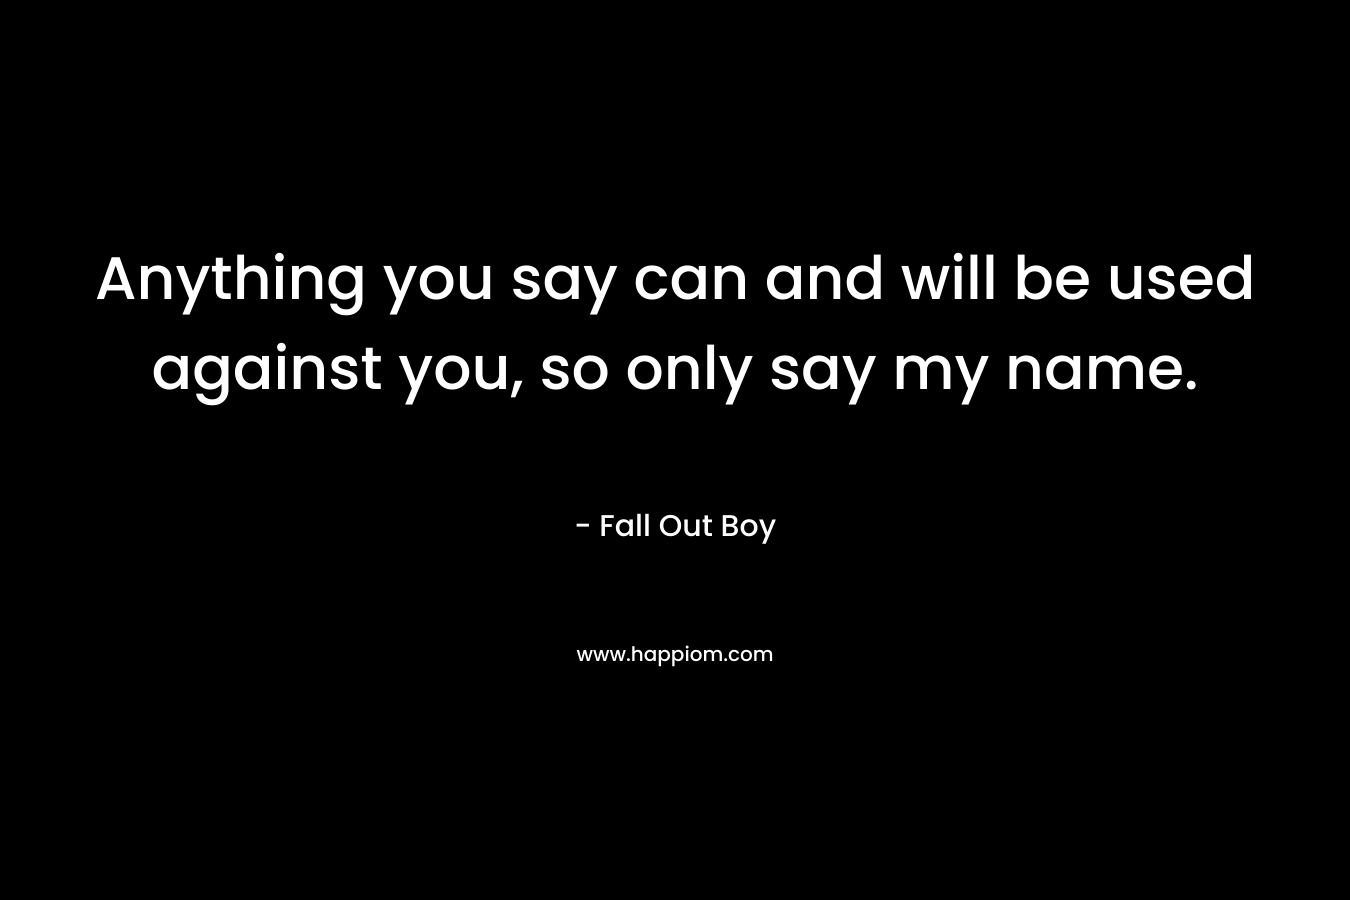 Anything you say can and will be used against you, so only say my name. – Fall Out Boy